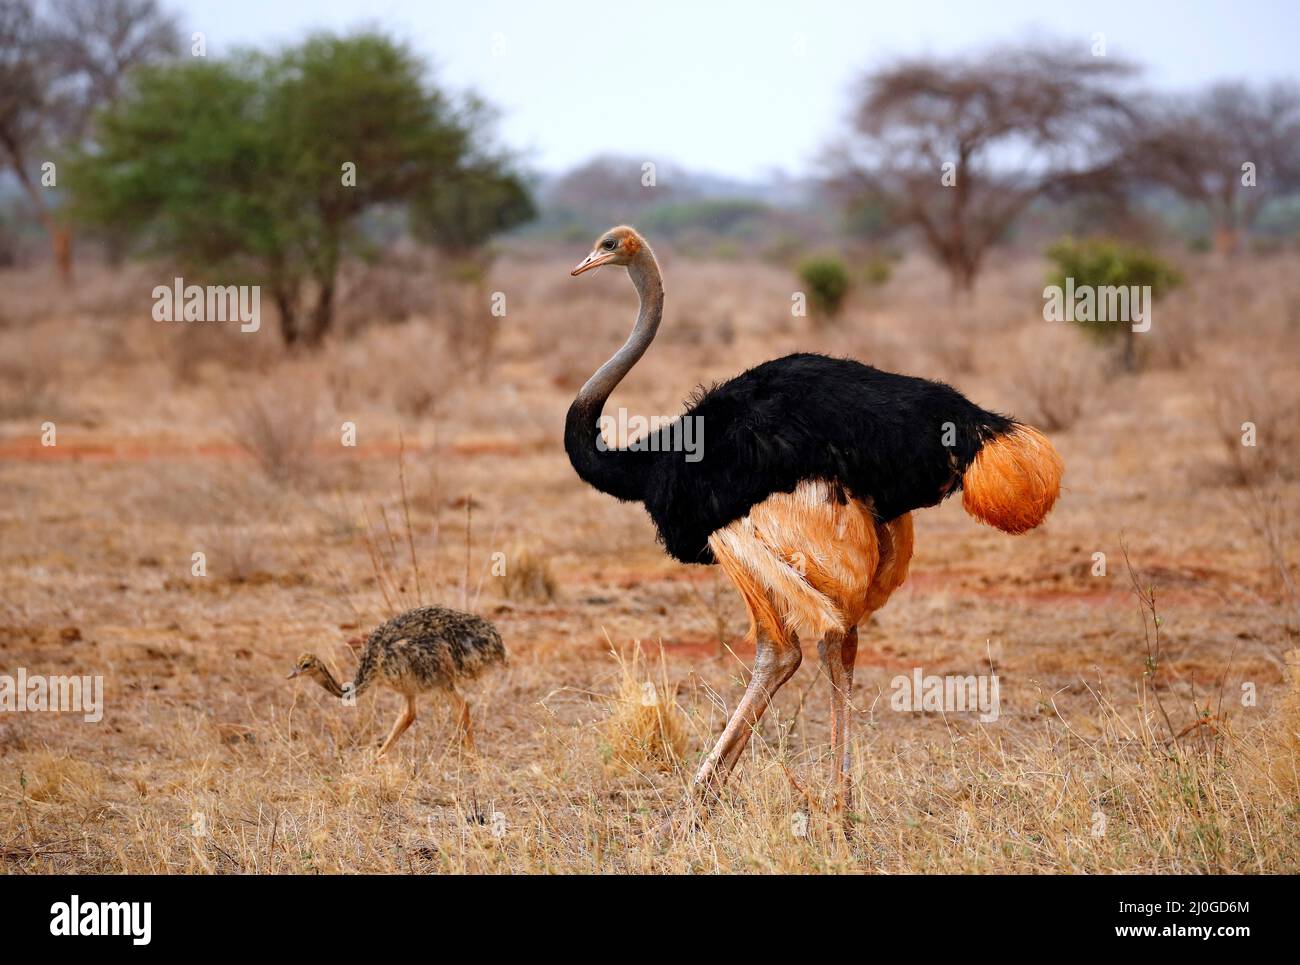 Male Common Ostrich (Struthio camelus), with Little Chick. Ngutuni, Tsavo East, Kenya Stock Photo